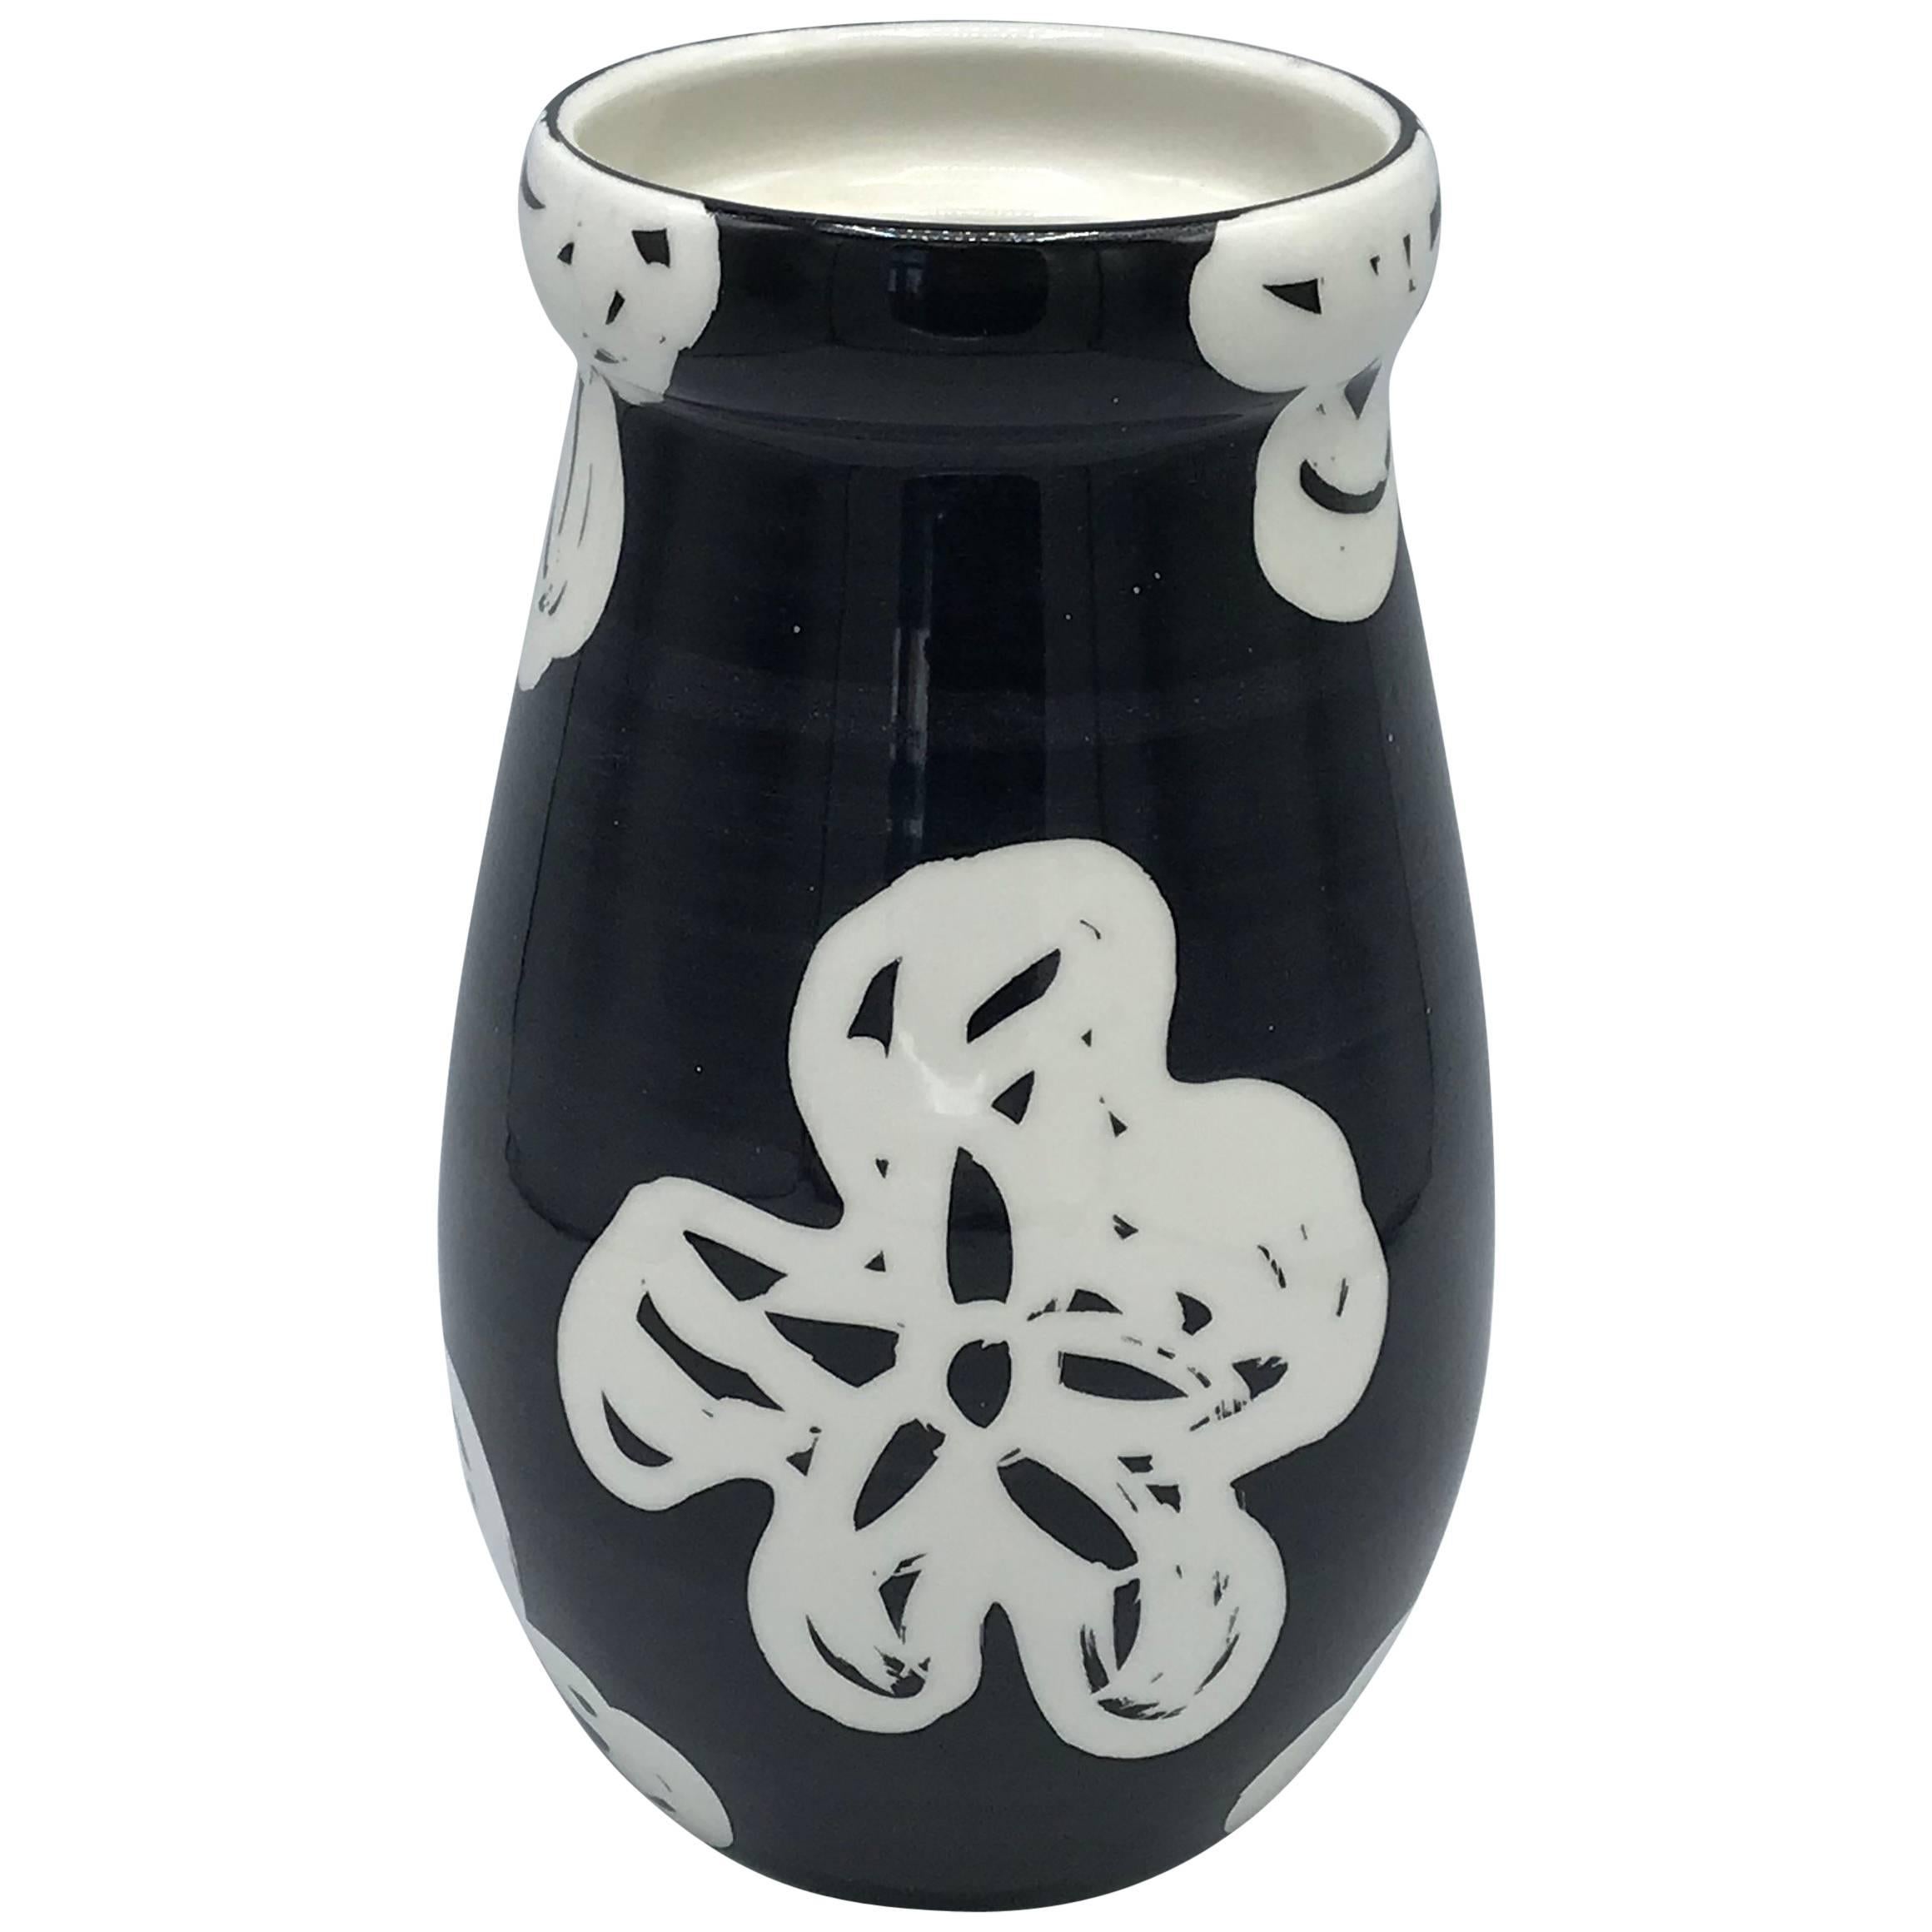 1970s Bitossi Vase with Modern Black and White Floral Motif